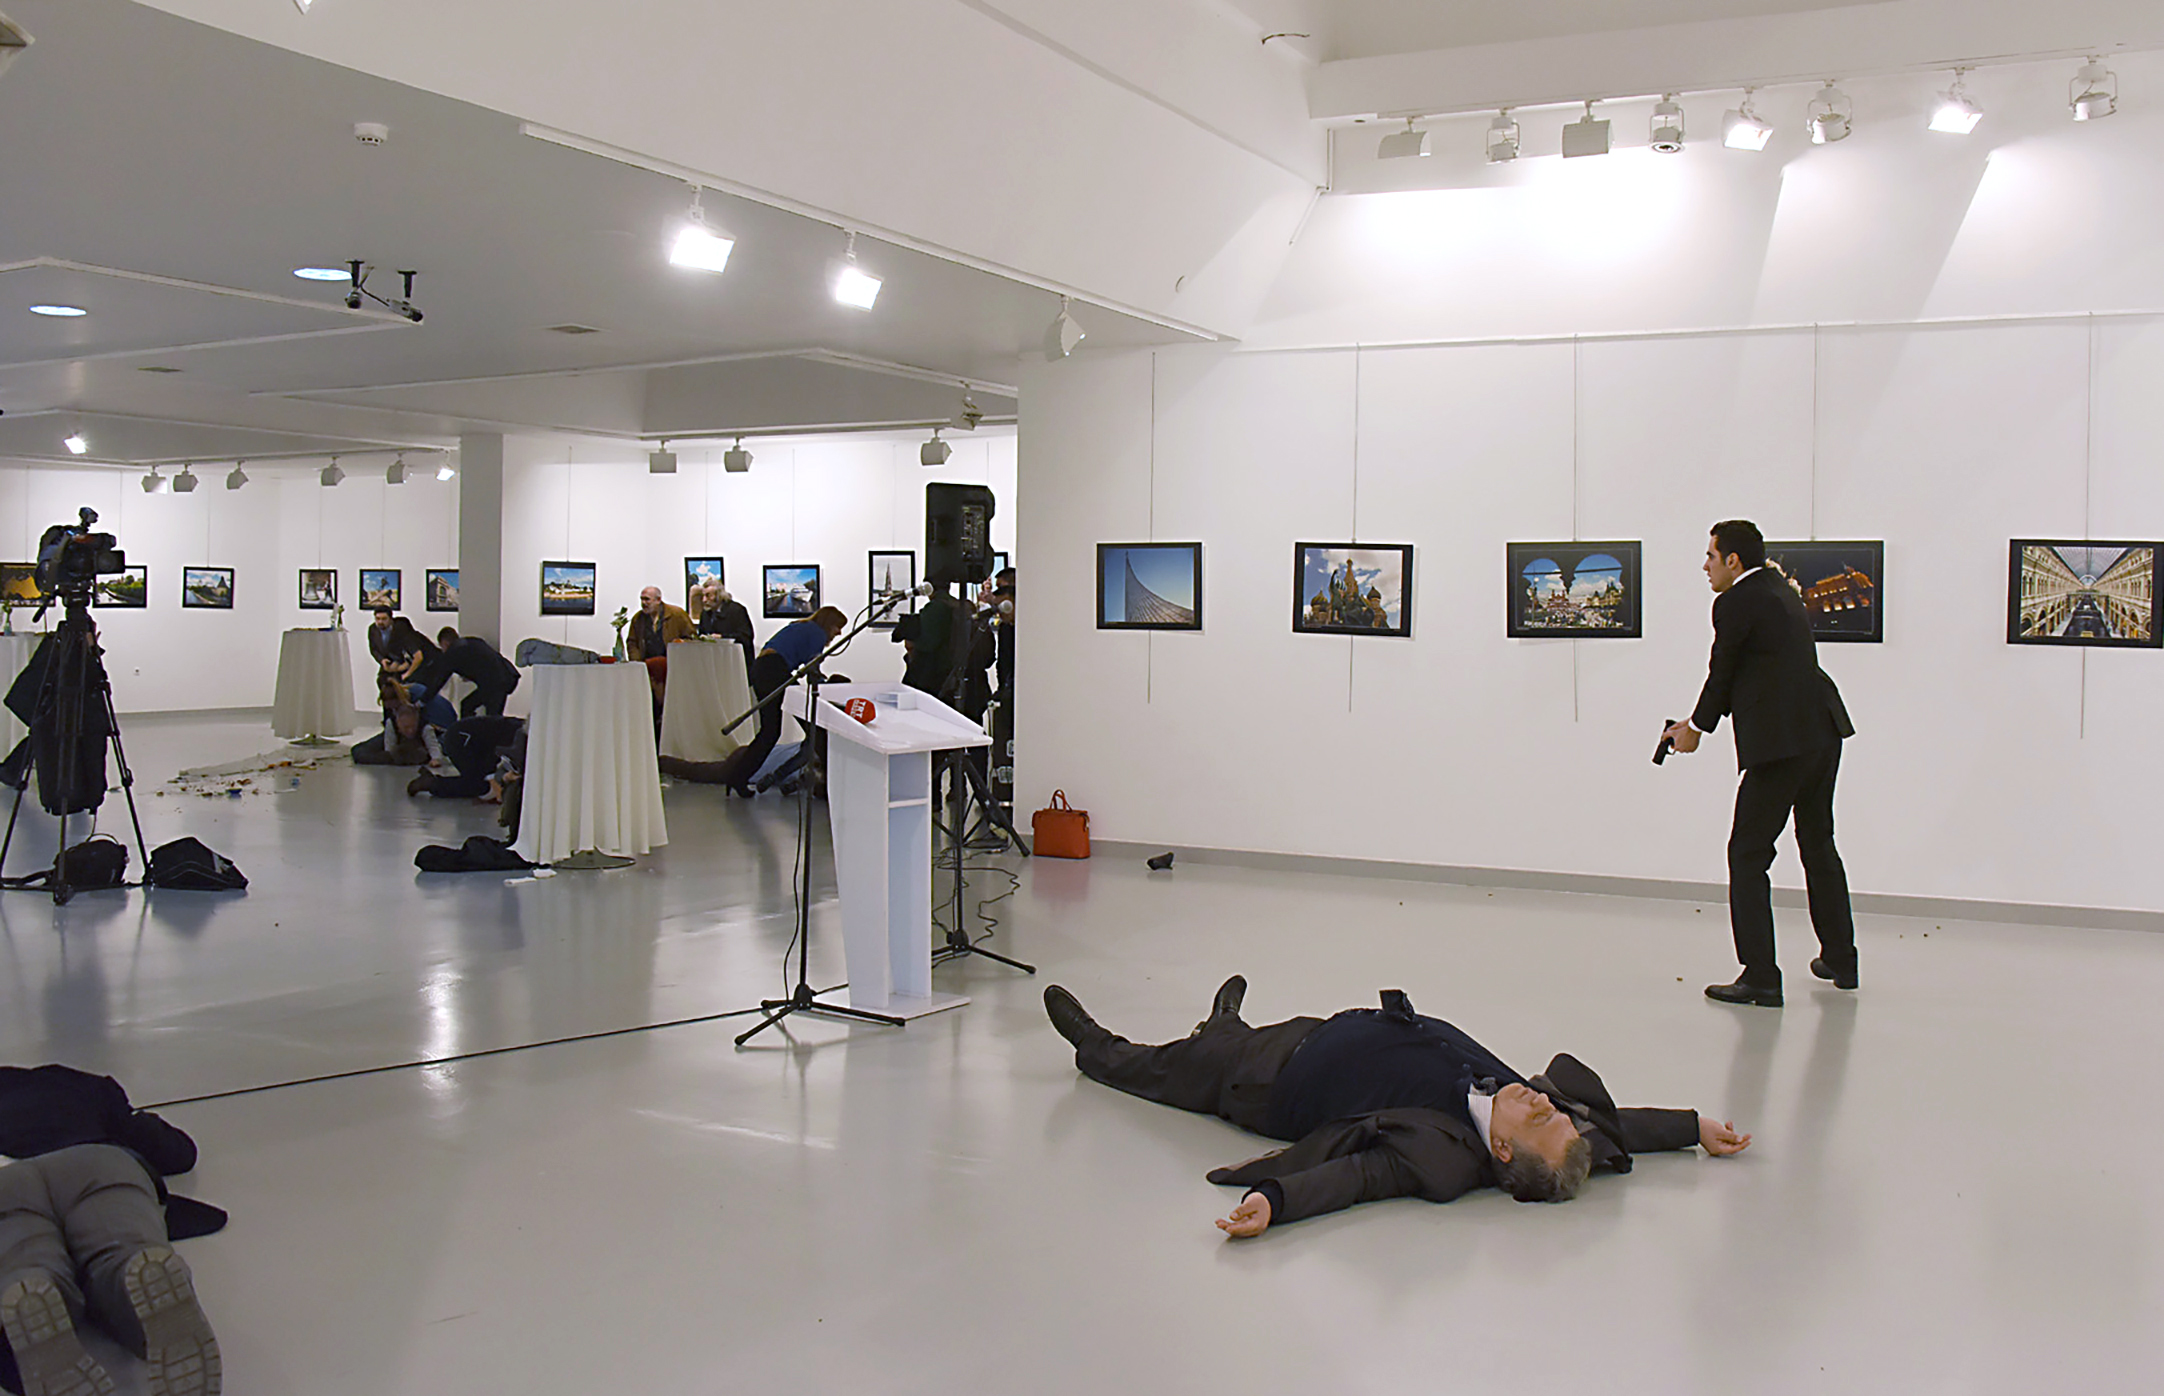 Andrey Karlov, Russia's ambassador to Turkey, lays on the ground after being shot by a gunman at a photo exhibit in Ankara on Dec. 19. He later died from his wounds.